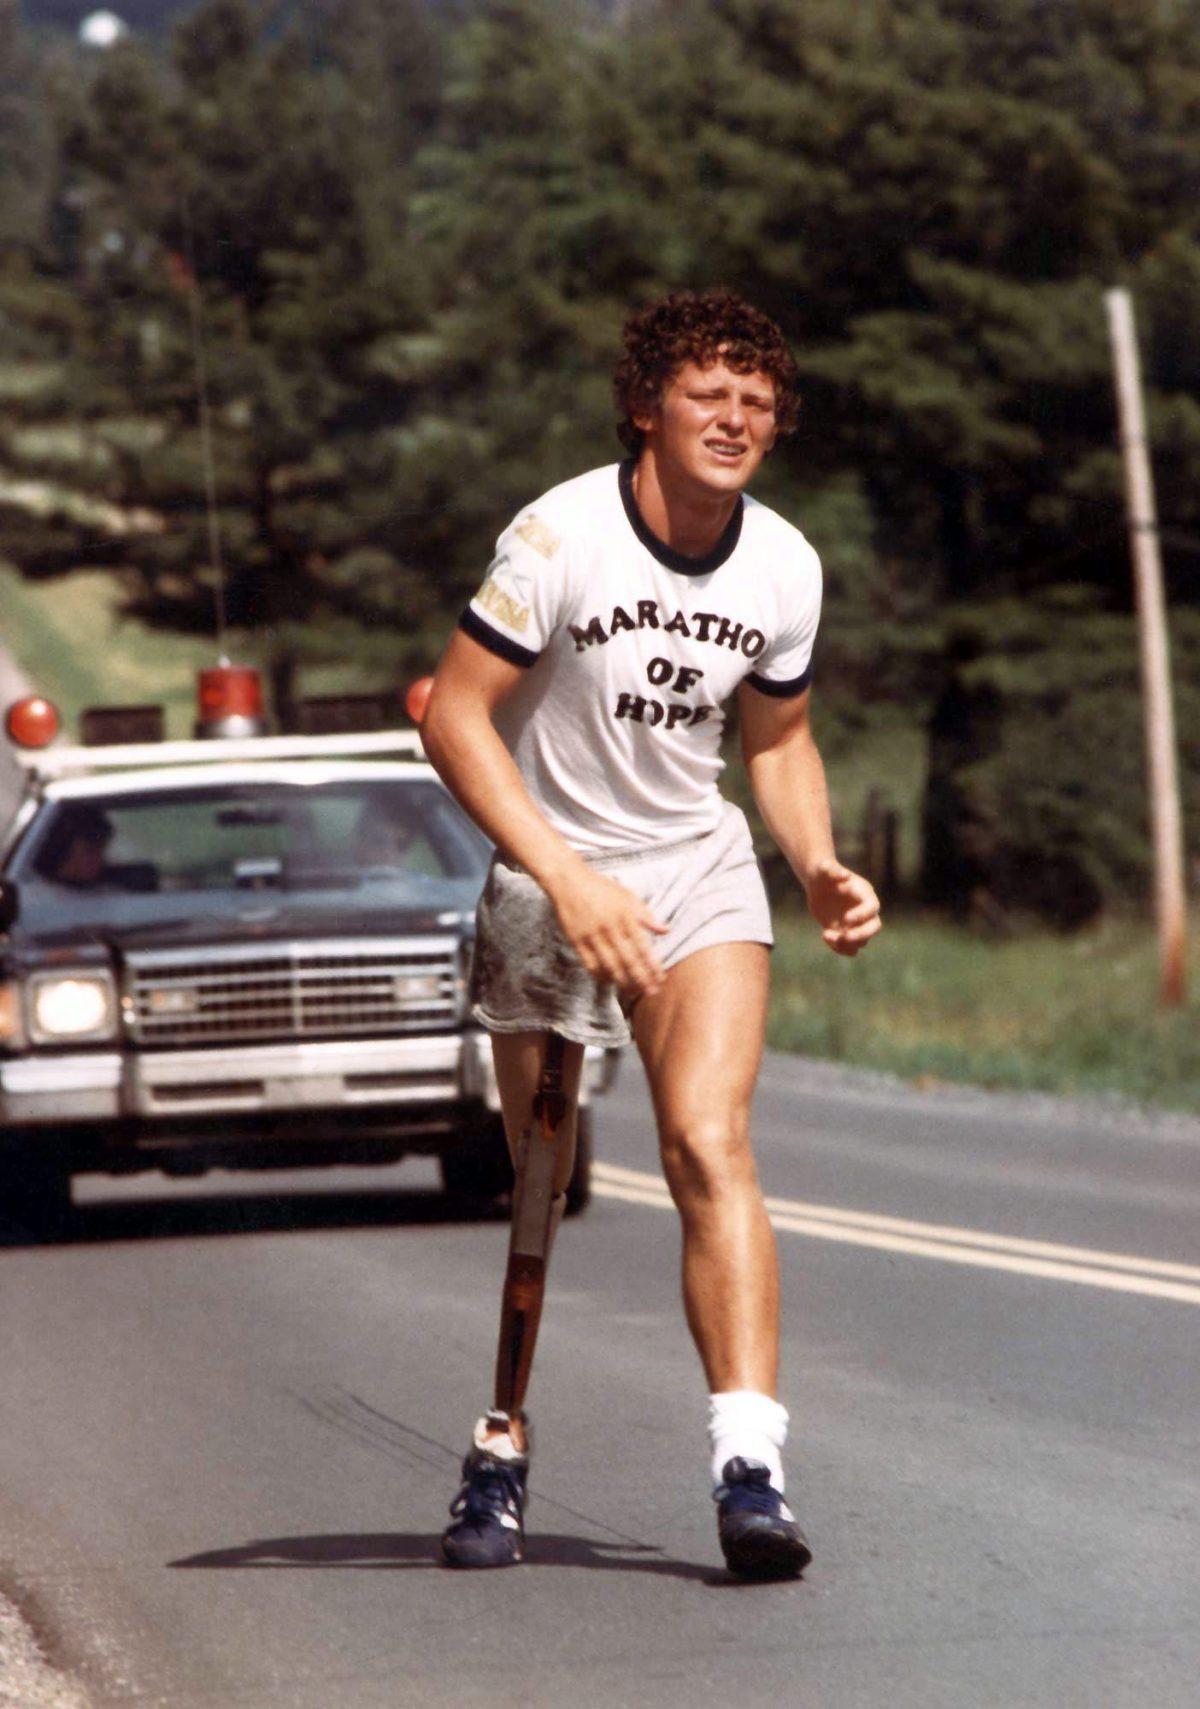 Marathon of Hope runner Terry Fox, shown in this undated photo, had his dream of running across the country cut short near Thunder Bay, Ont., when he learned that cancer had spread to his lungs. (The Canadian Press)